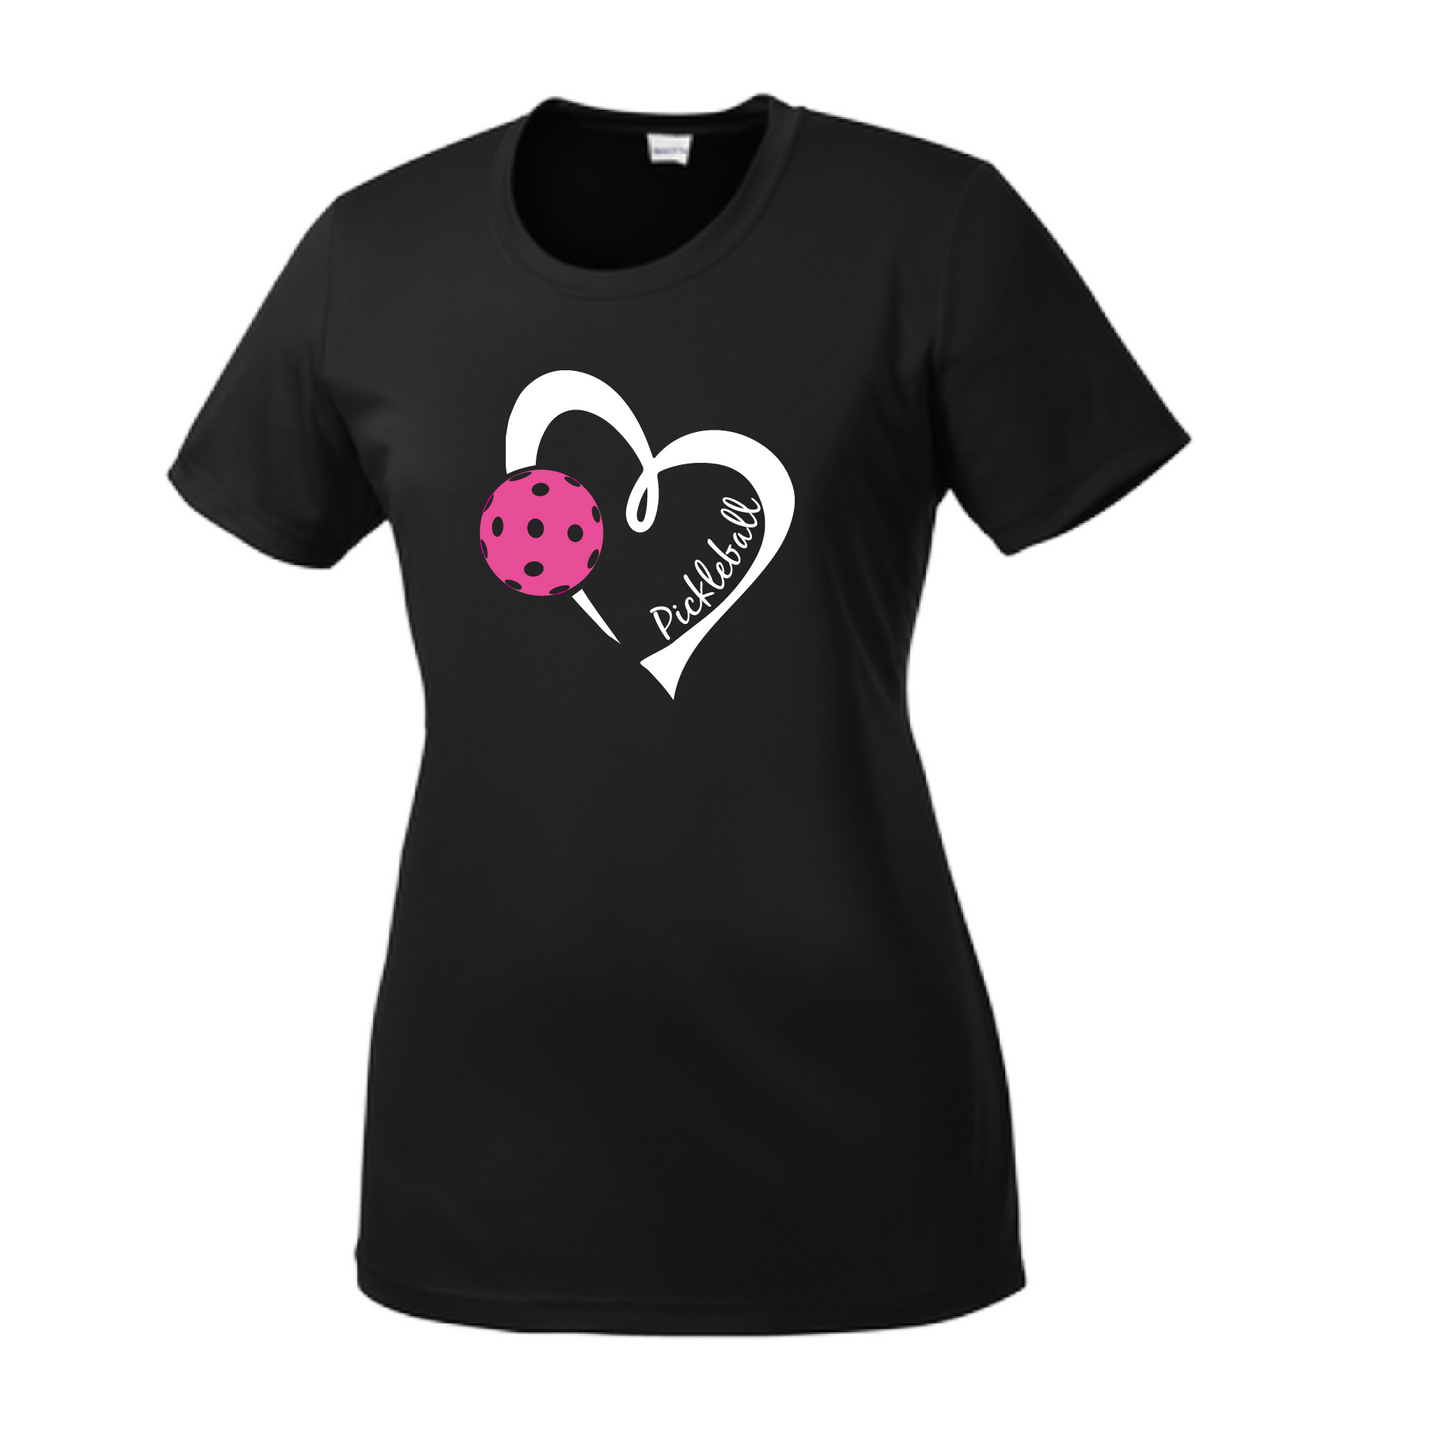 Pickleball Design: Heart with Pickleball  Women's Styles: Short Sleeve Crew-Neck  Turn up the volume in this Women's shirt with its perfect mix of softness and attitude. Material is ultra-comfortable with moisture wicking properties and tri-blend softness. PosiCharge technology locks in color. Highly breathable and lightweight.